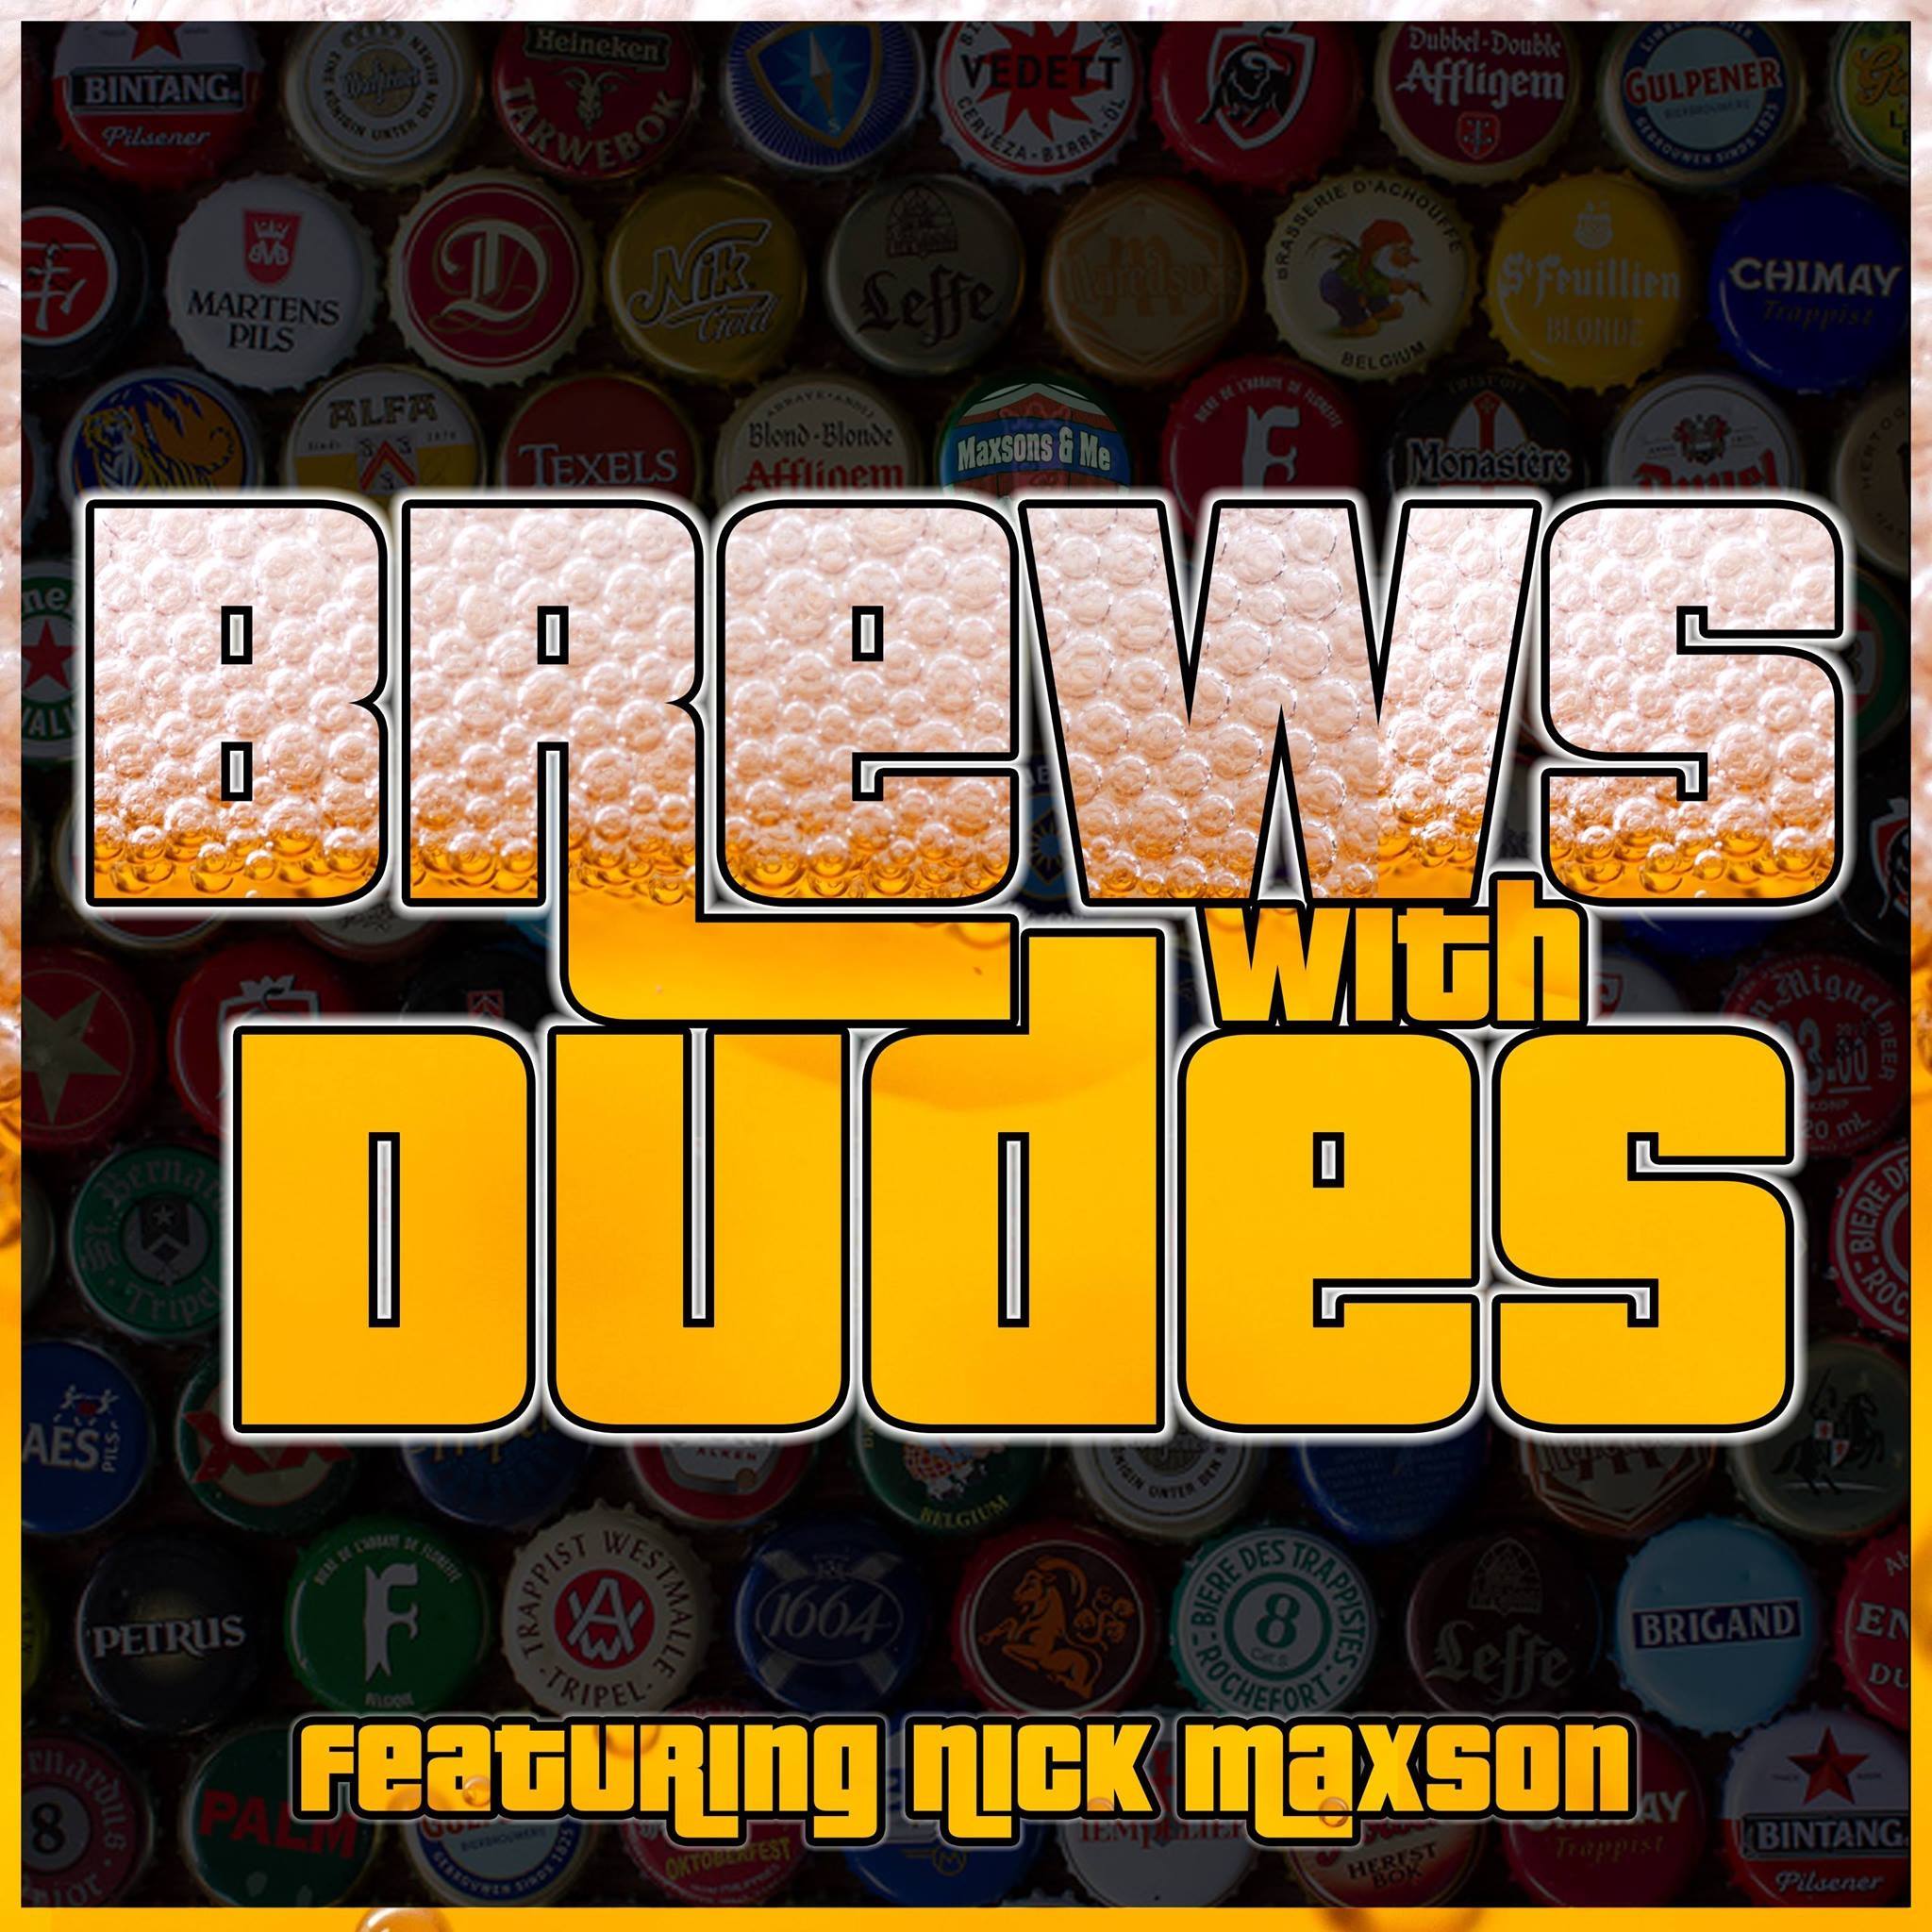 Brews With Dudes 039 - a Shake, a Quadruple, and a Pinch of October